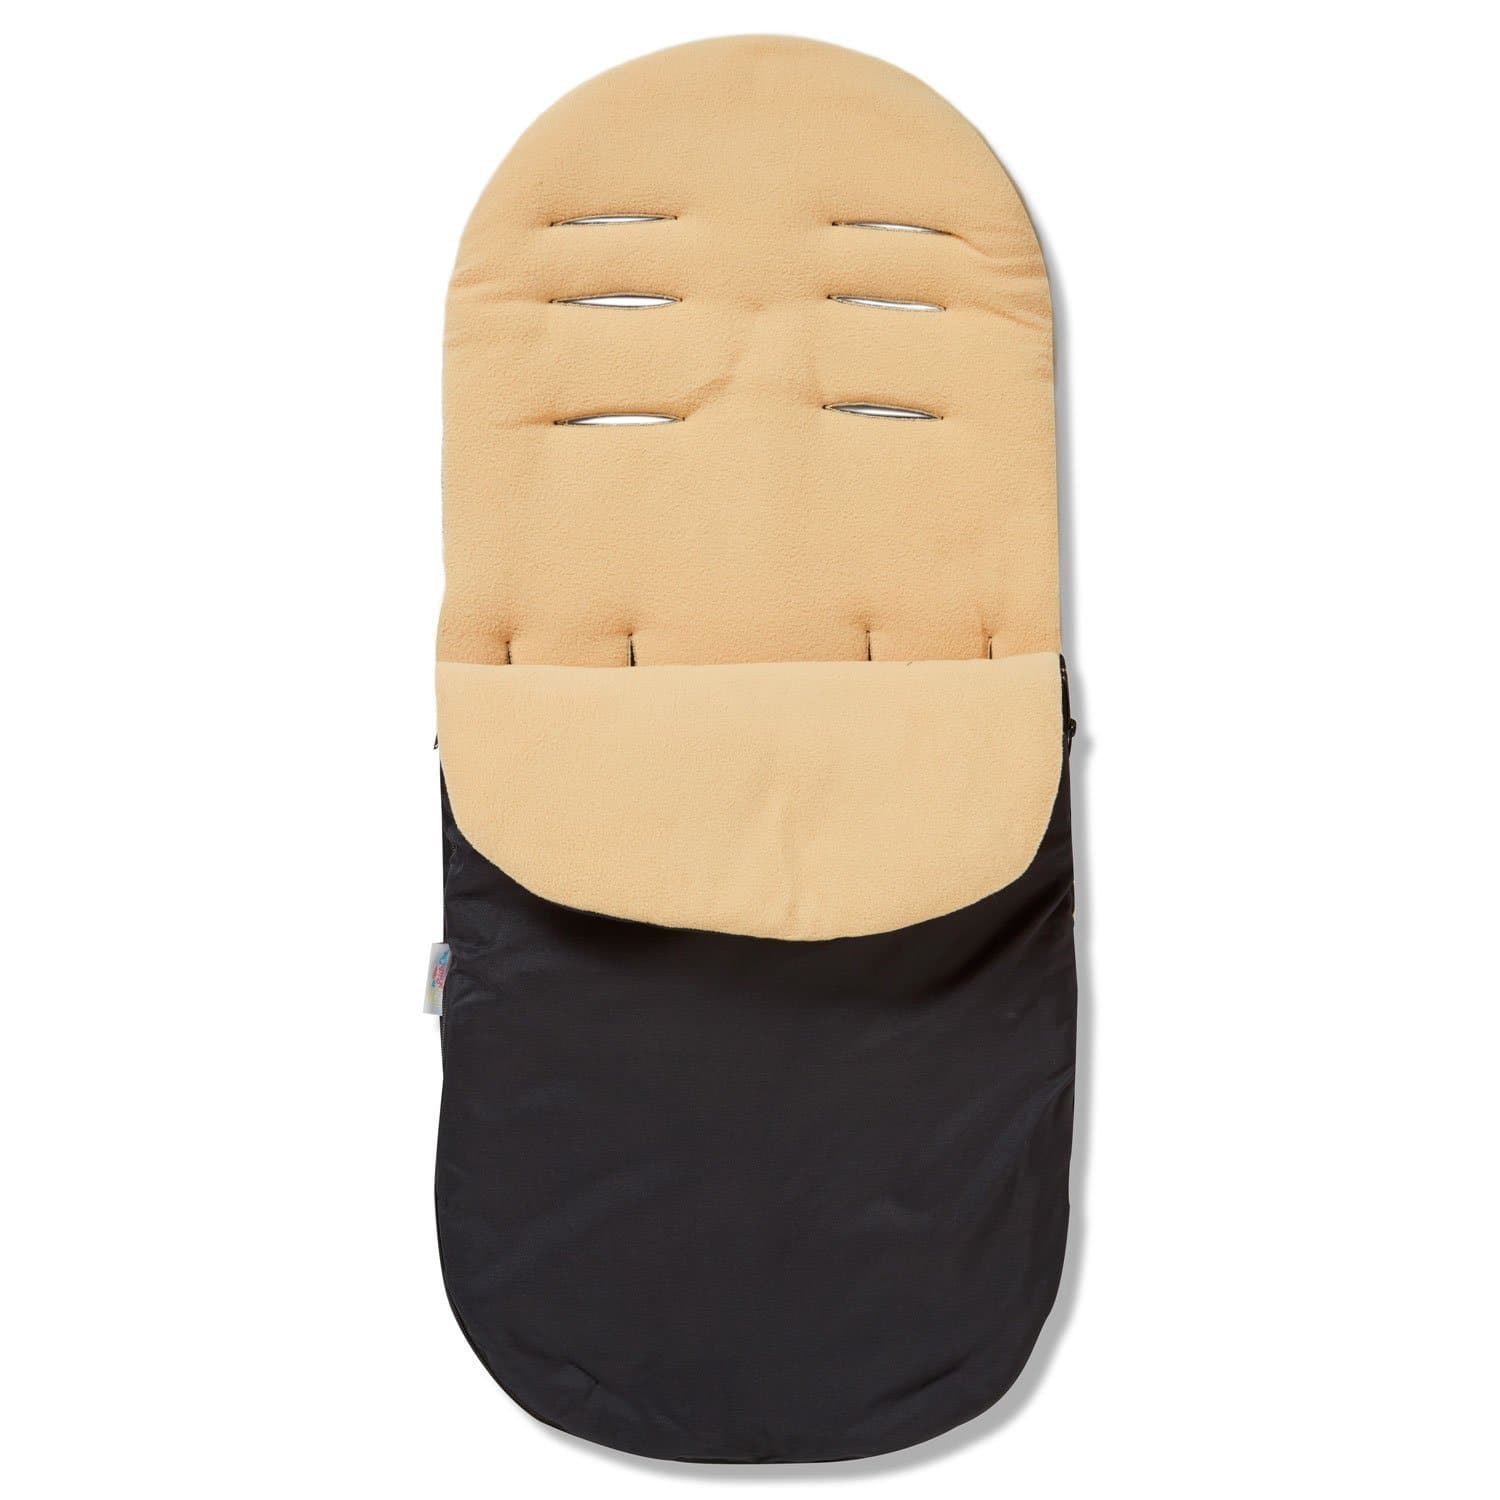 Footmuff / Cosy Toes Compatible with BabySun - Sand / Fits All Models | For Your Little One